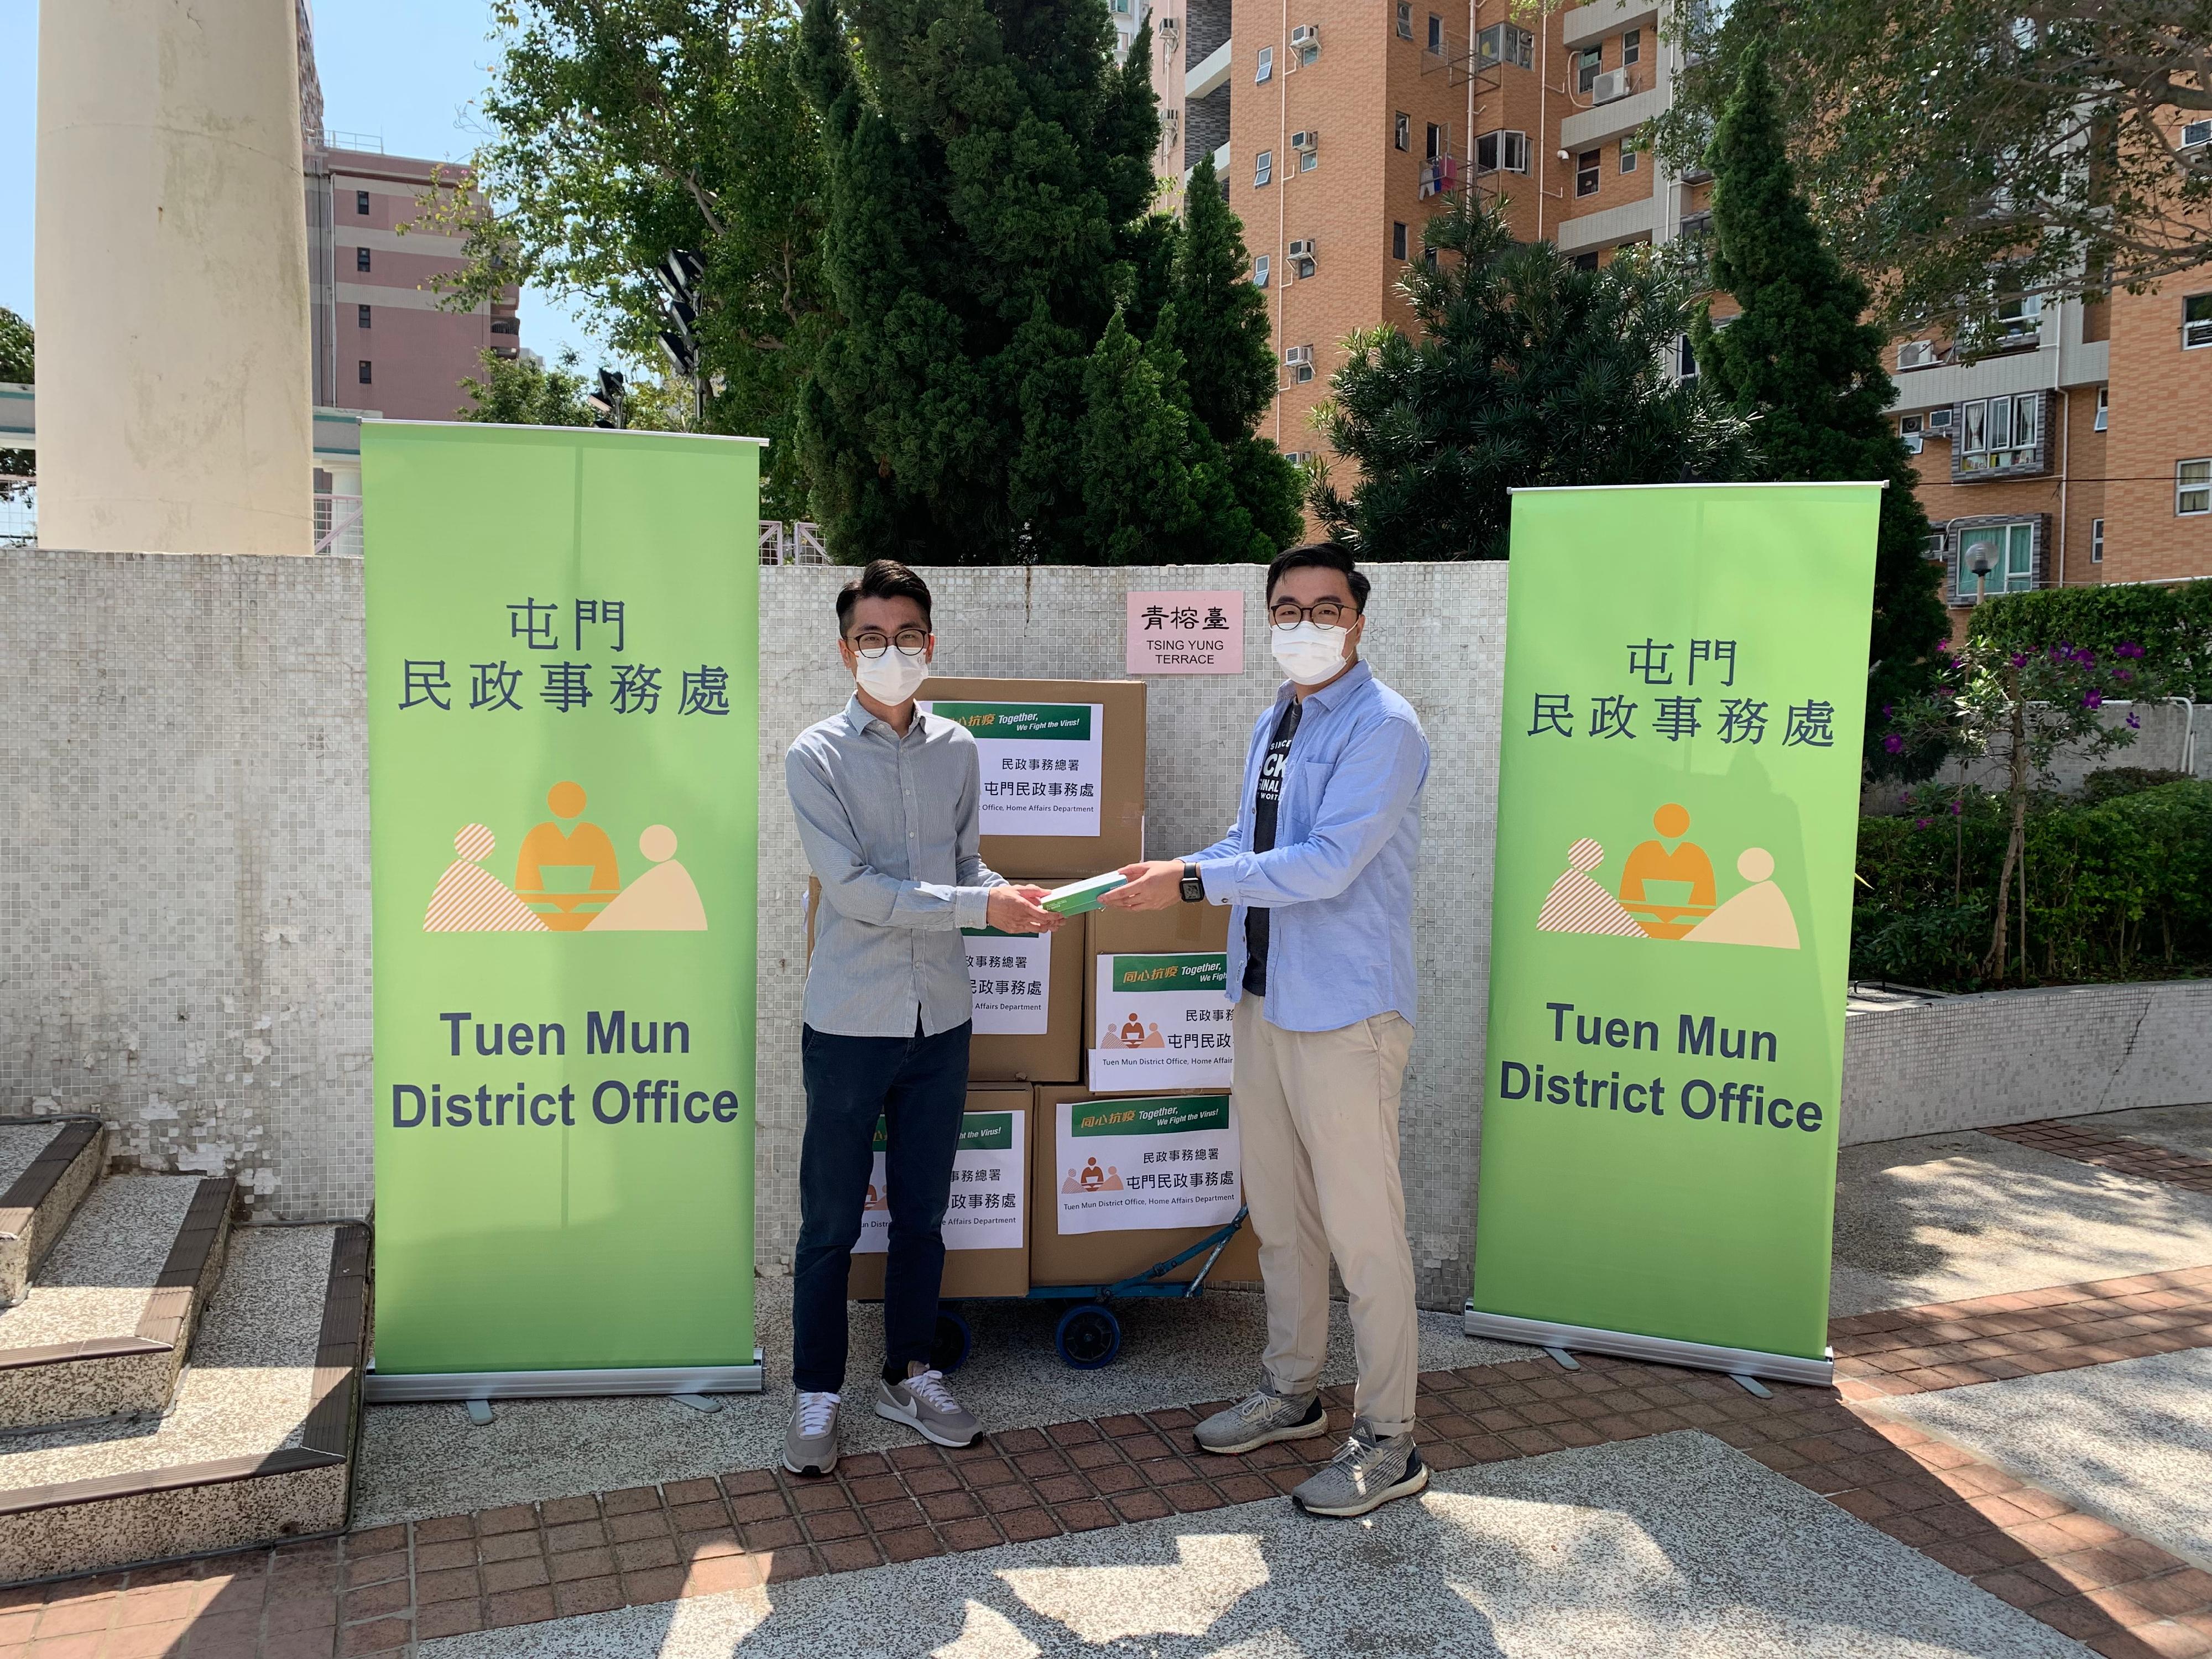 The Tuen Mun District Office today (March 11) distributed COVID-19 rapid test kits to households, cleansing workers and property management staff living and working in Tsing Yung Terrace for voluntary testing through the property management company.